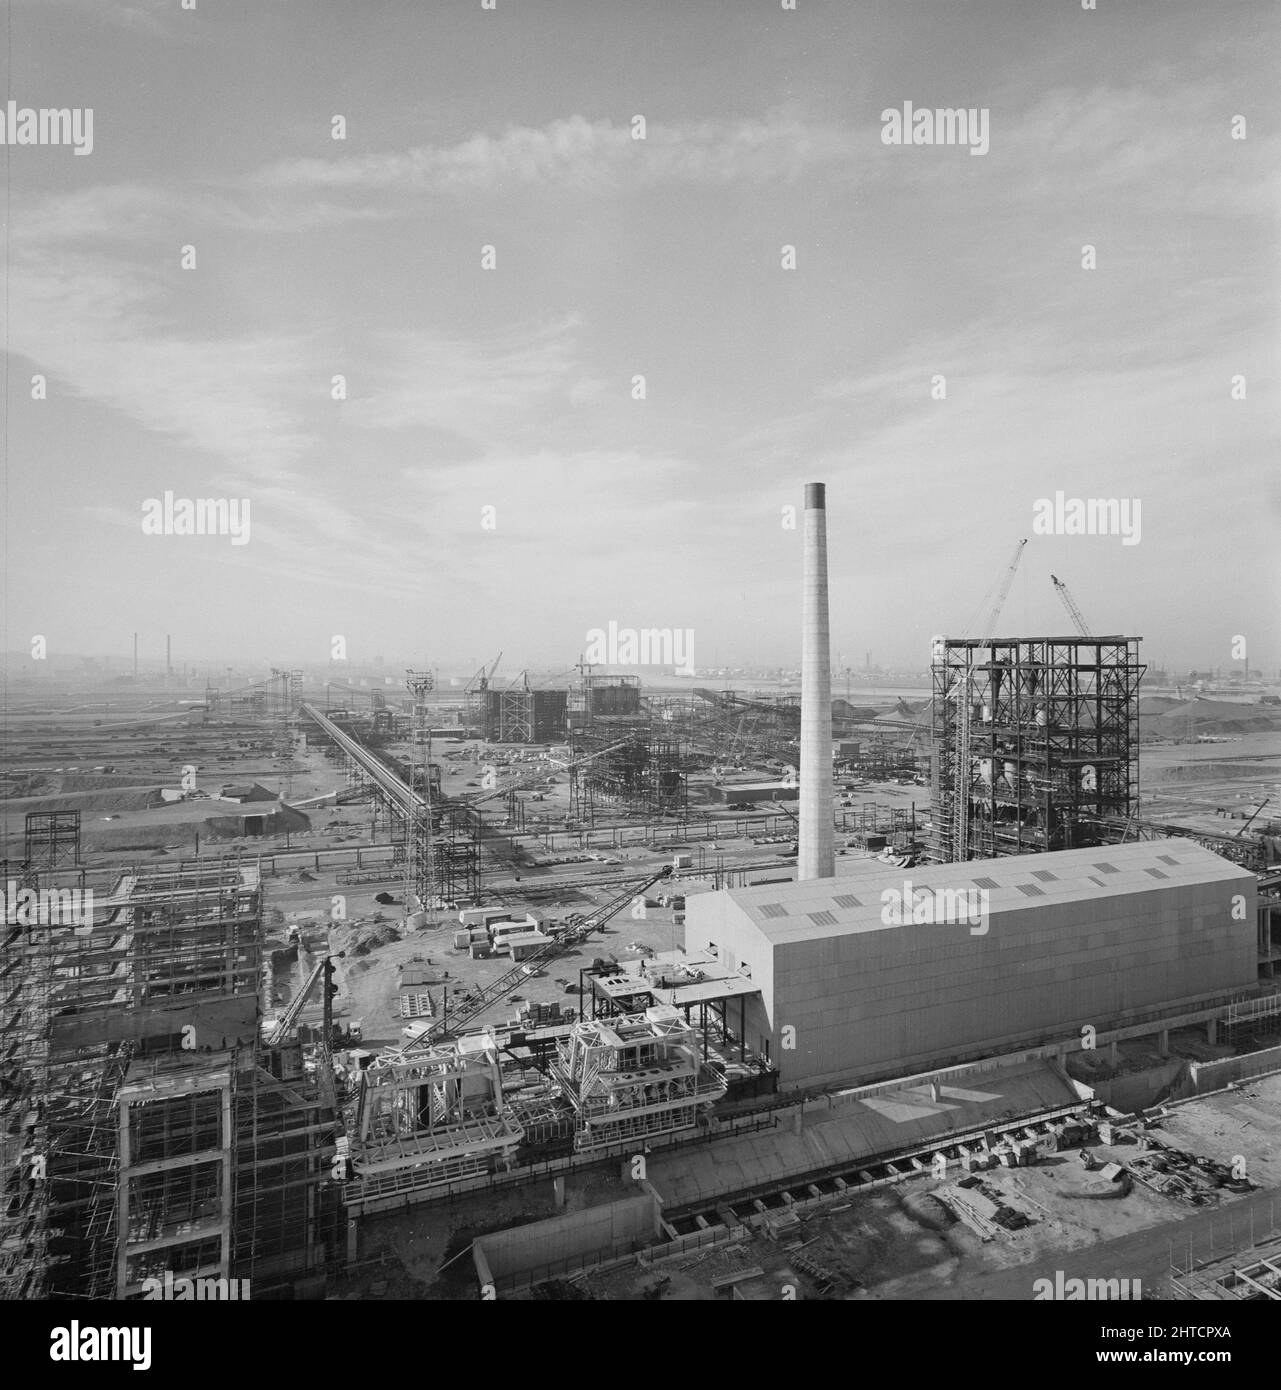 Steel Works, Redcar and Cleveland, North Yorkshire, 16/09/1975. A general view across the ore handling area at the British Steel Works at Redcar. This image was used in the January 1976 edition of Team Spirit the Laing company newsletter. Stock Photo